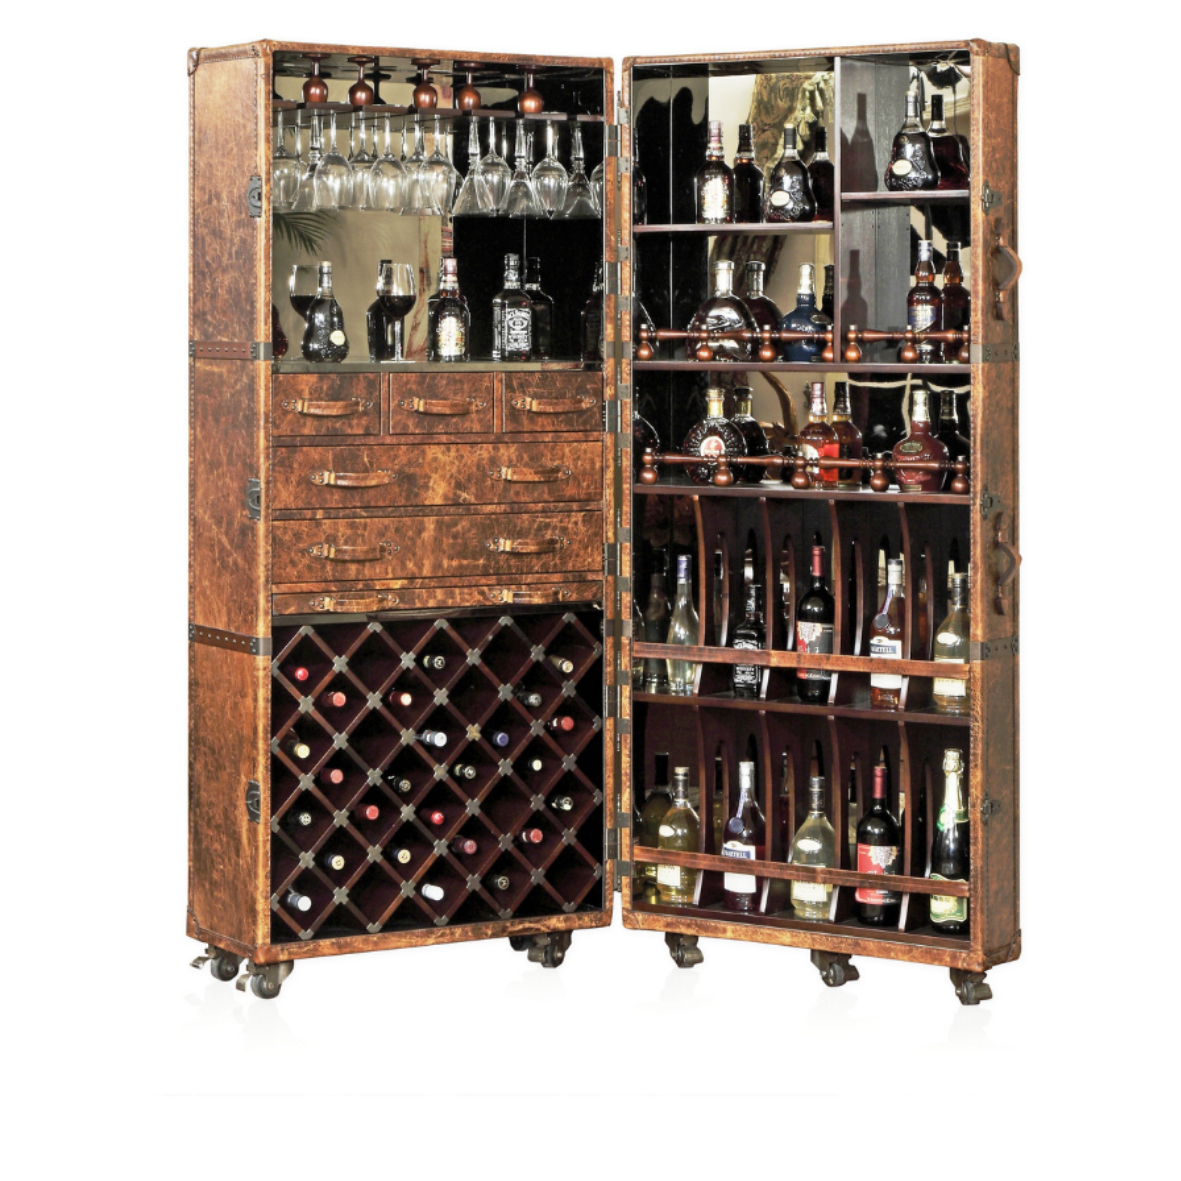 Classic whisky cabinet Singapore        